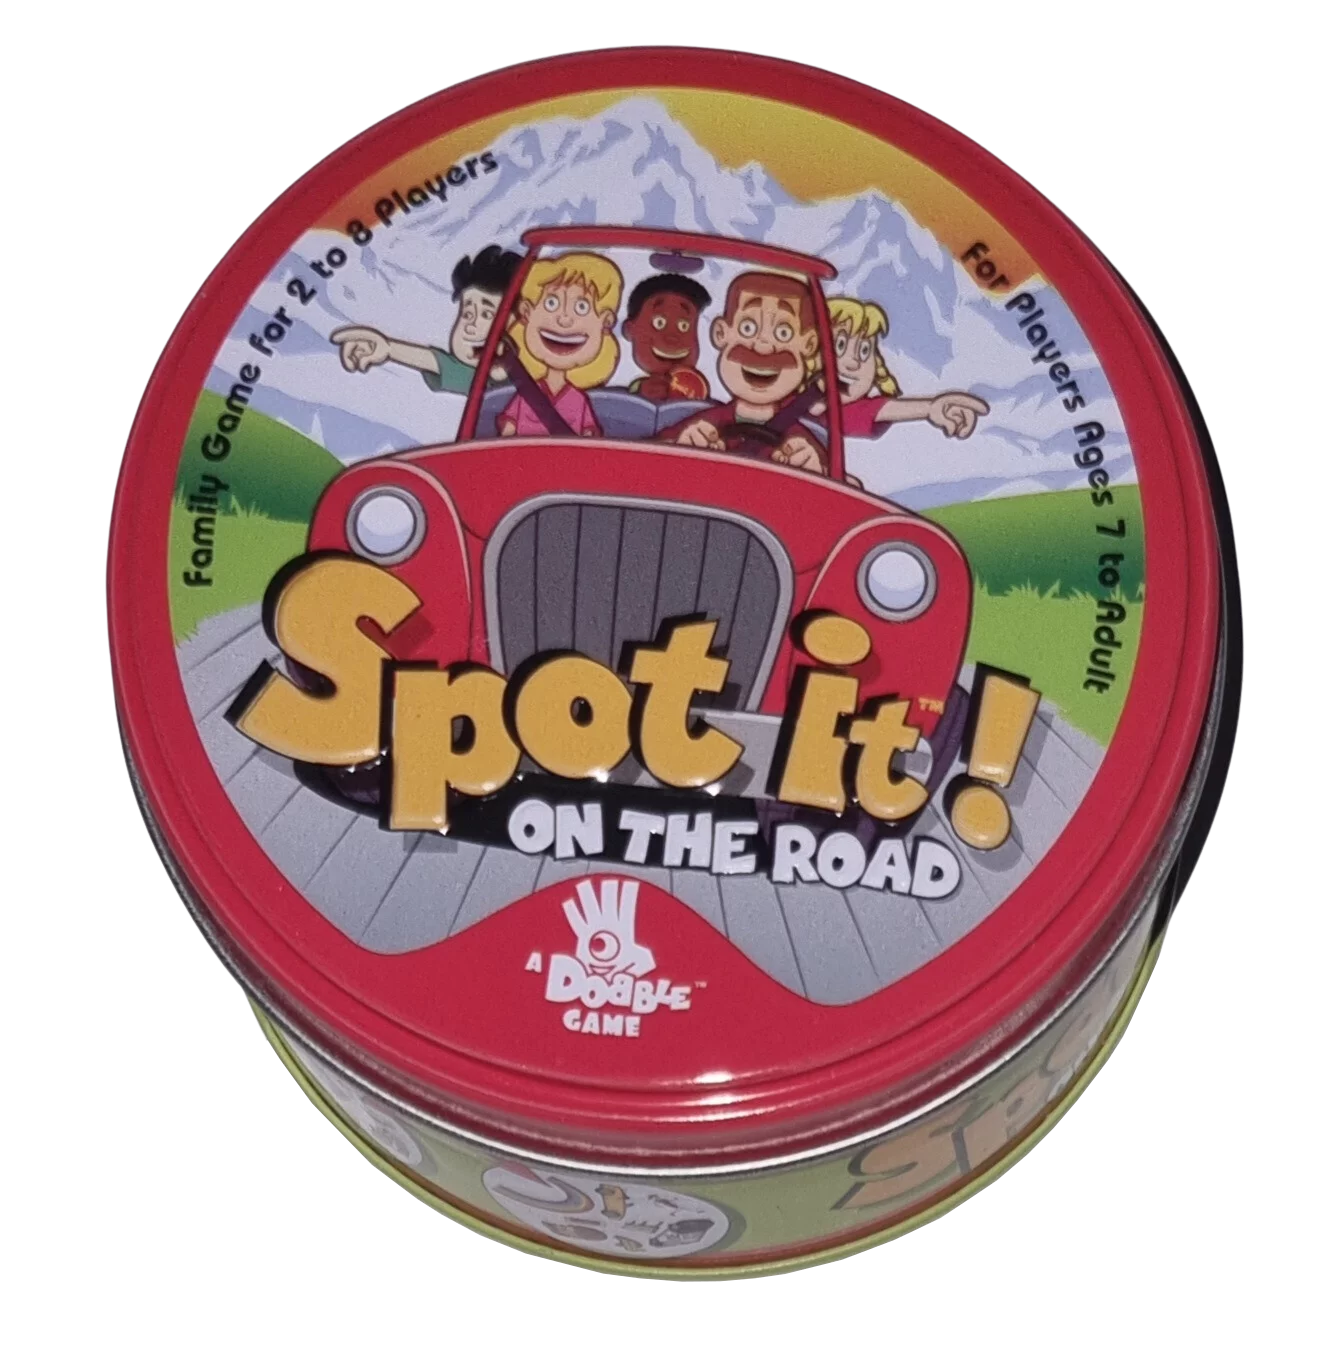 Asmodee Spot it! On the Road